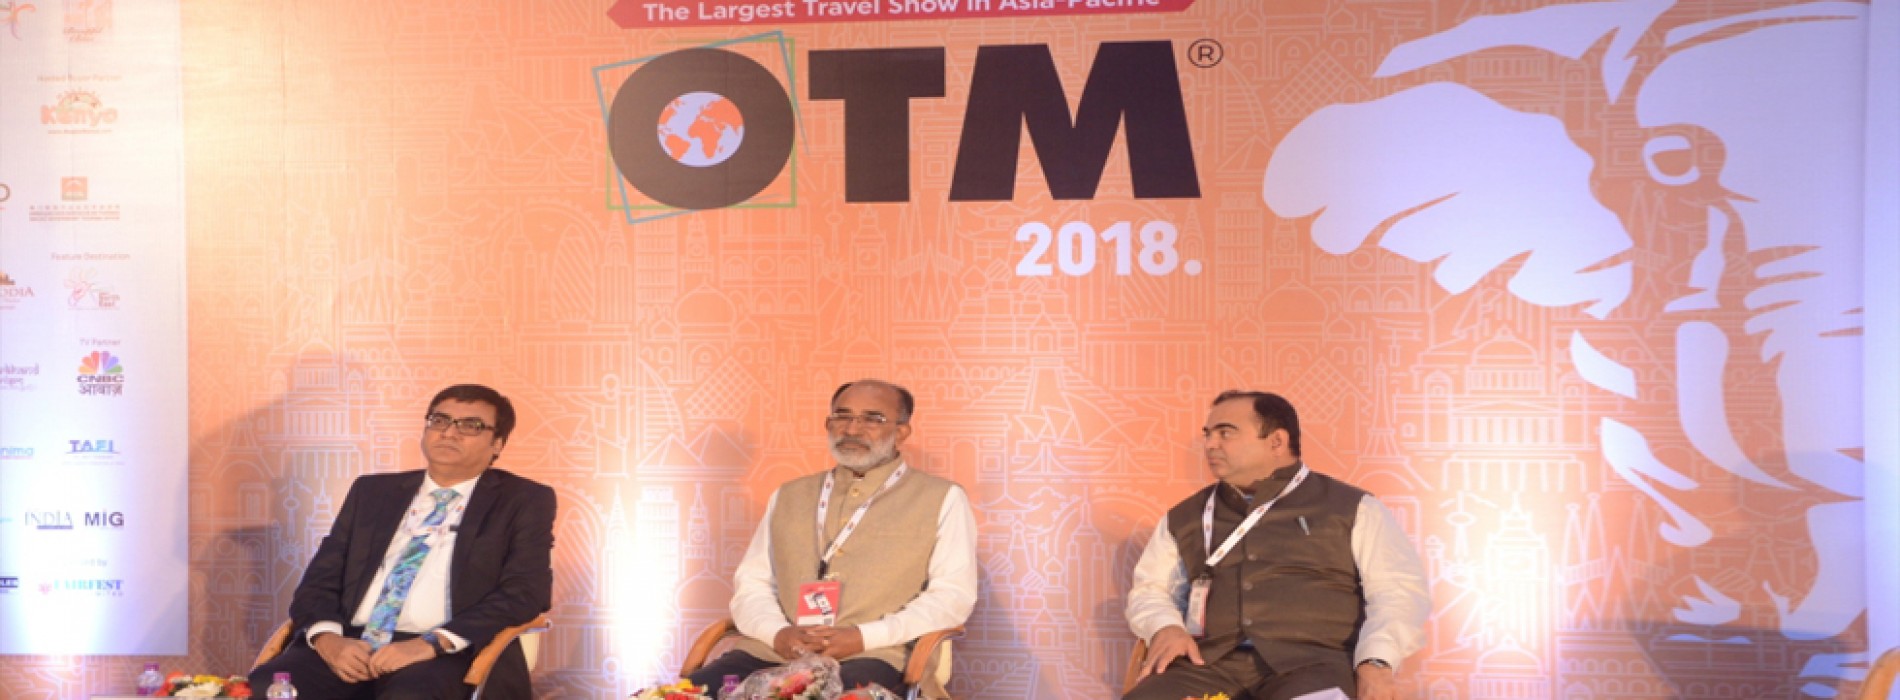 Asia-Pacific’s largest travel trade show, OTM begins in Mumbai